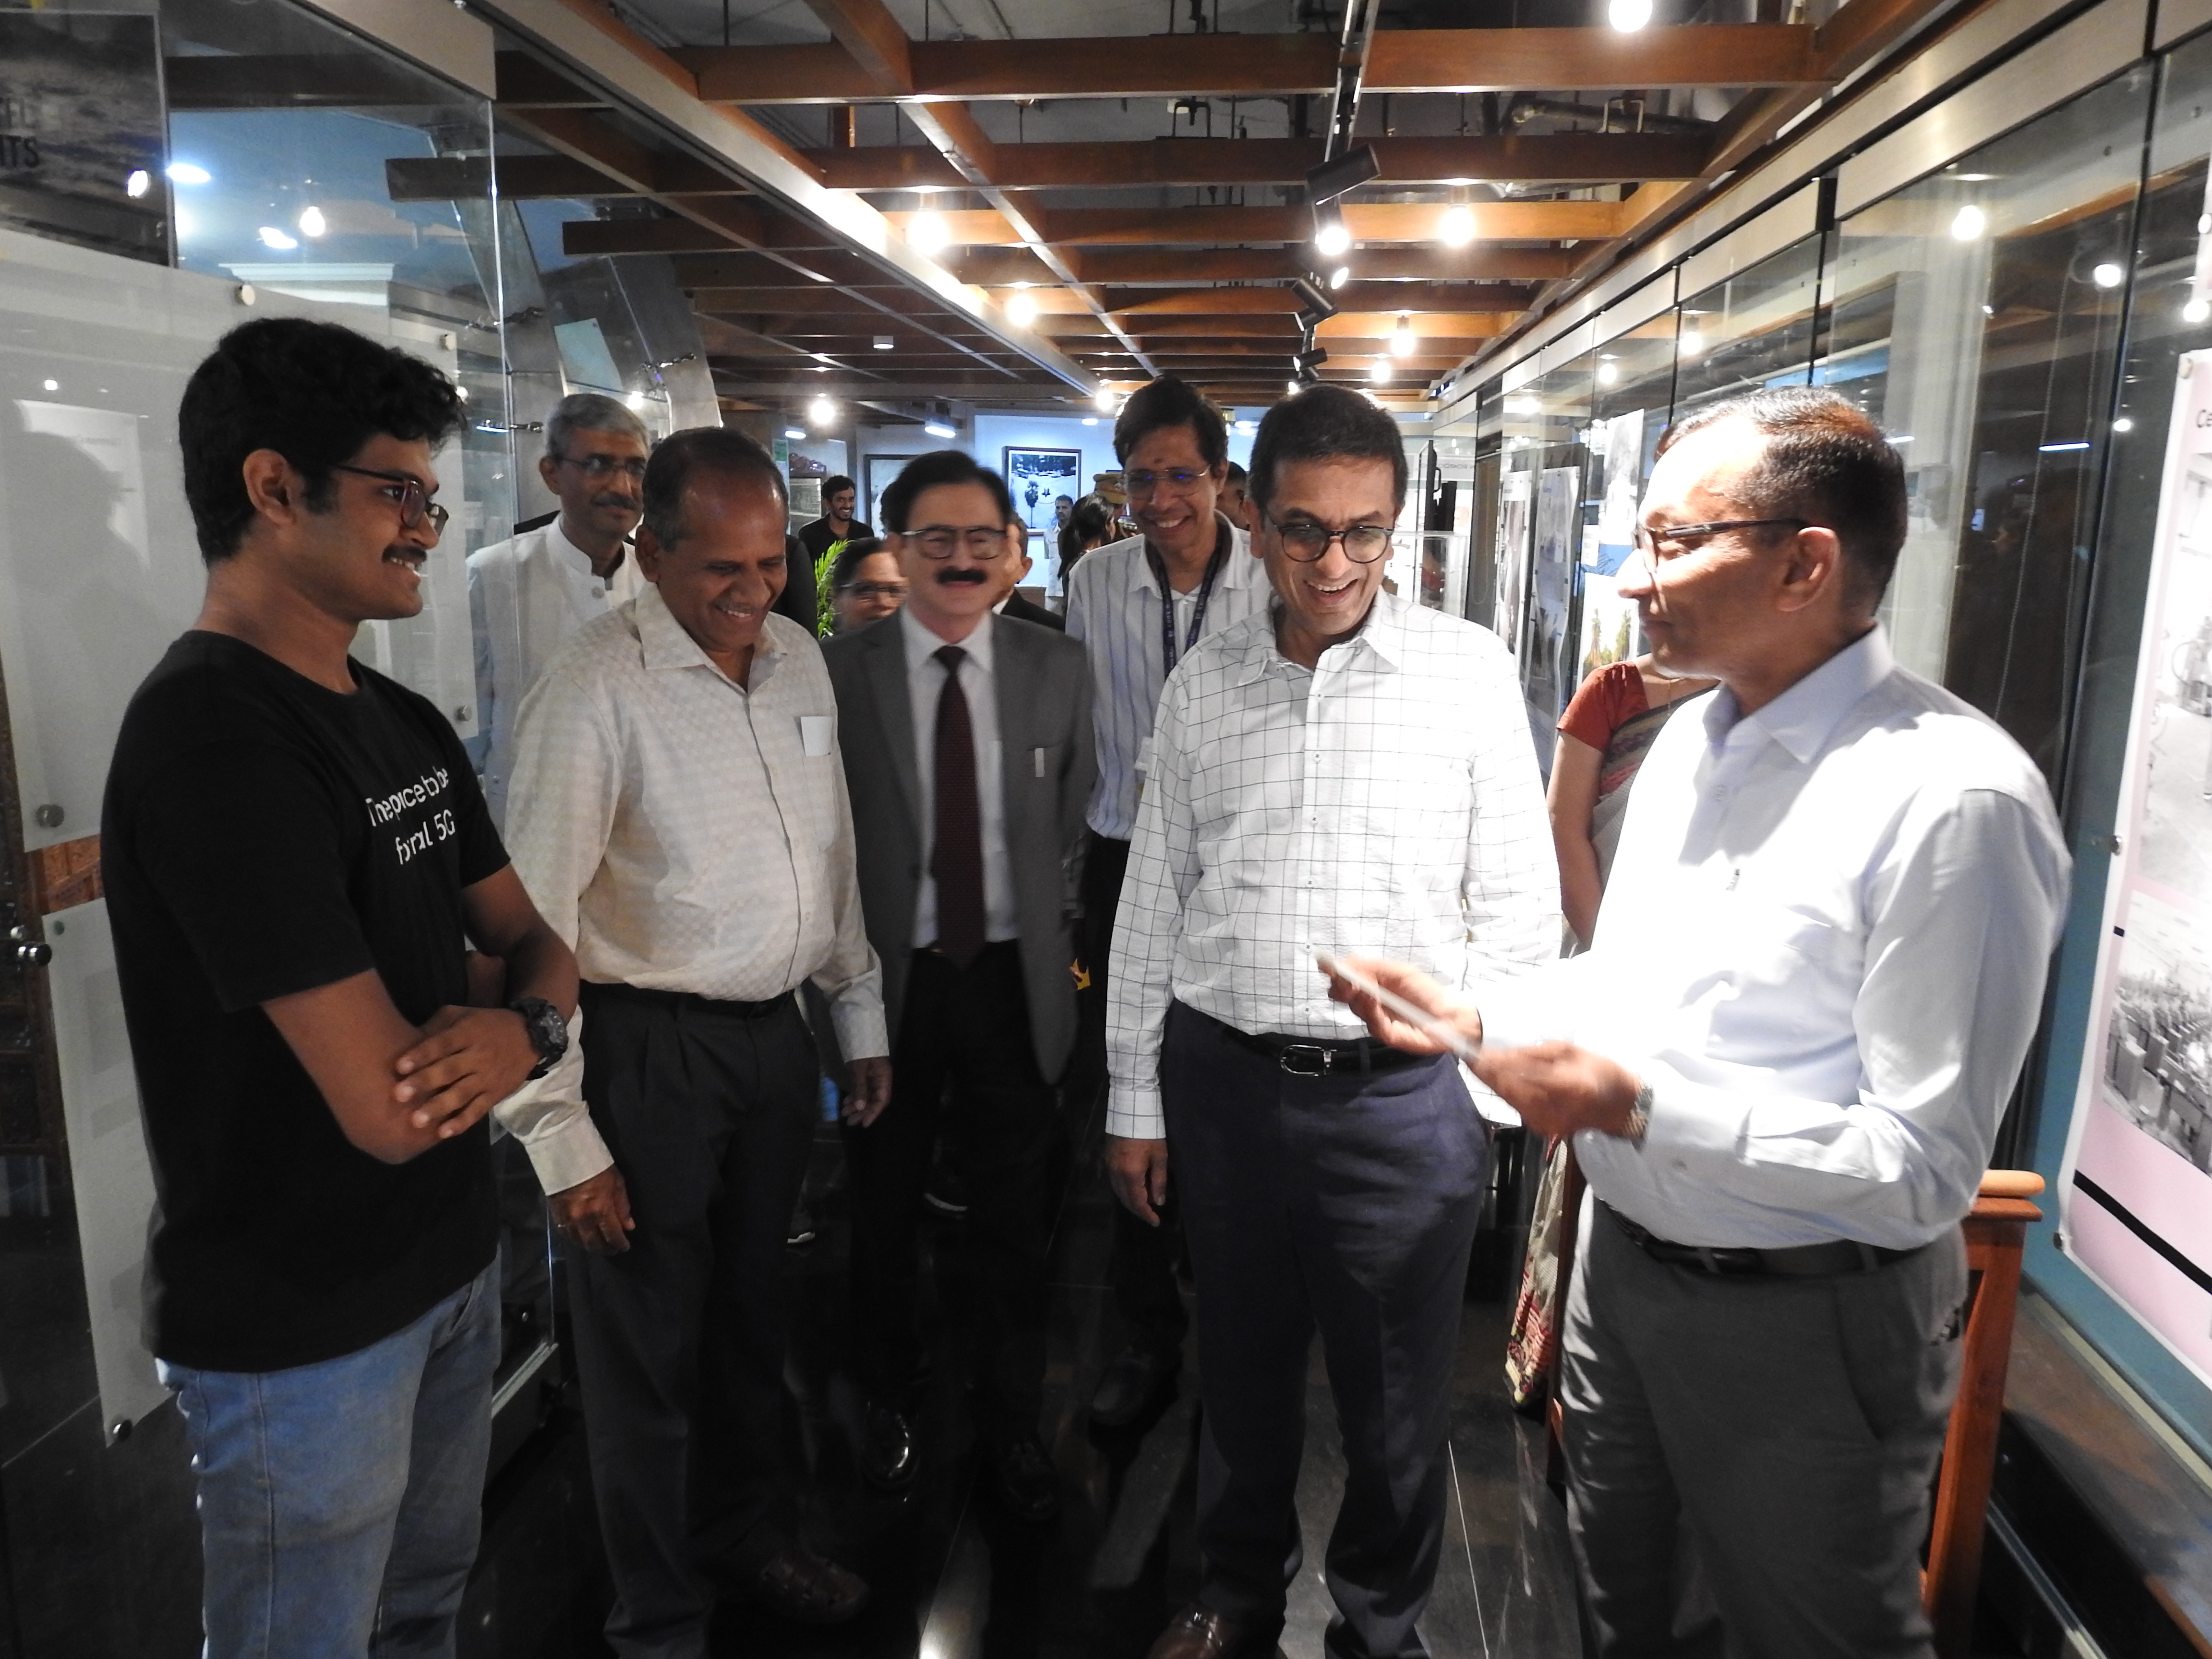 Chief Justice of India Dhananjaya Y. Chandrachud at the Heritage Centre